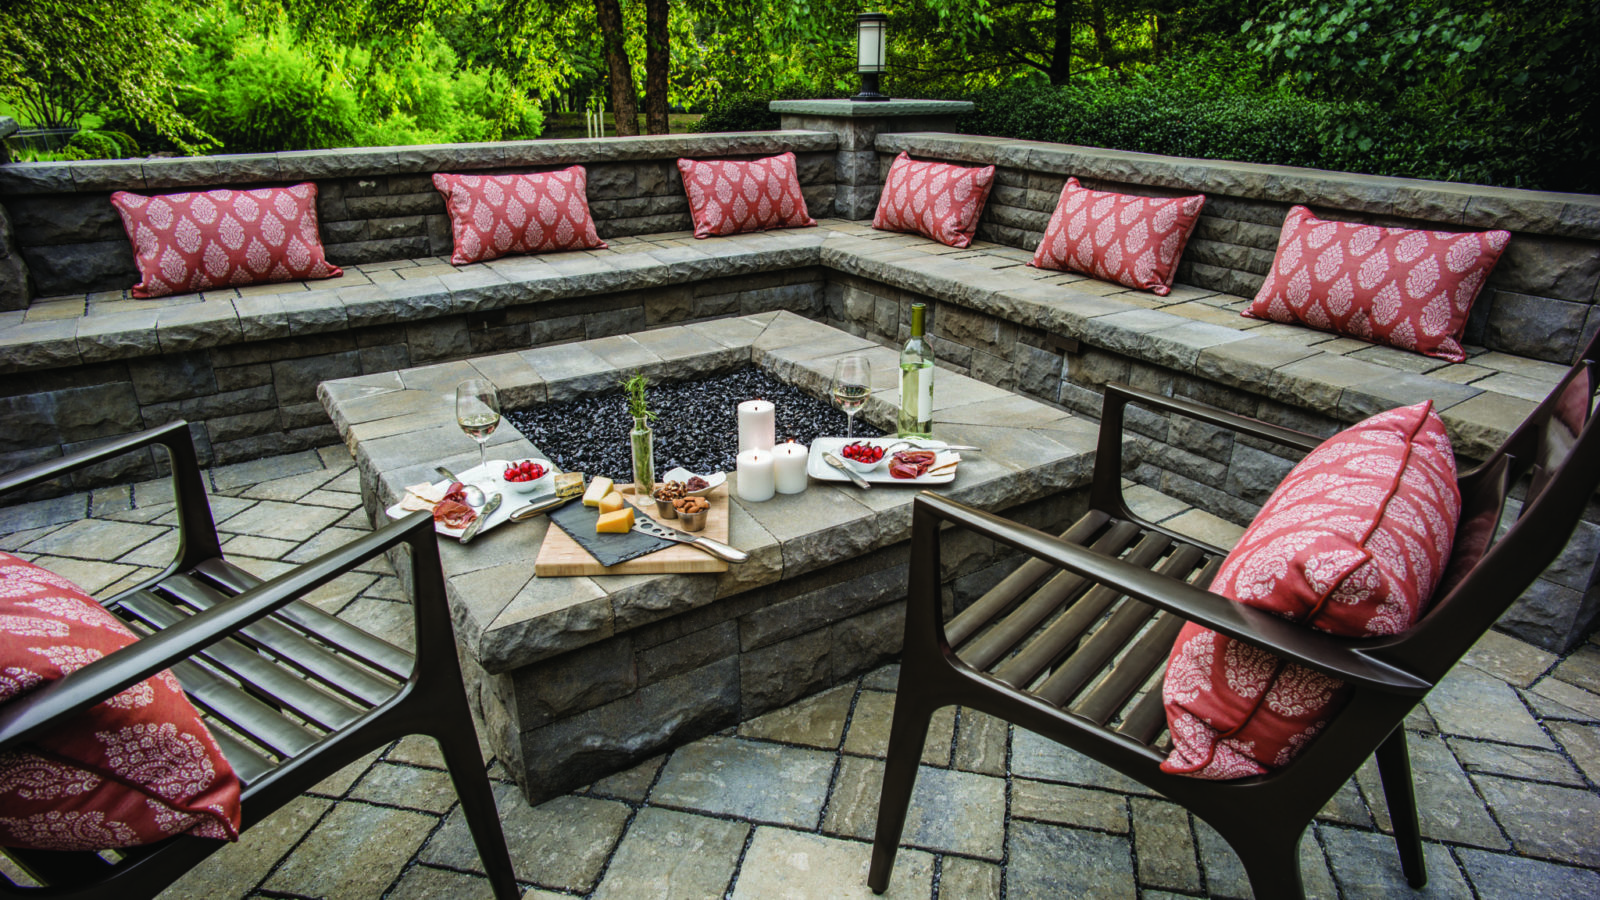 6 Outdoor Fire Pit Tips For Beautiful, Outdoor Seating Around Fire Pit